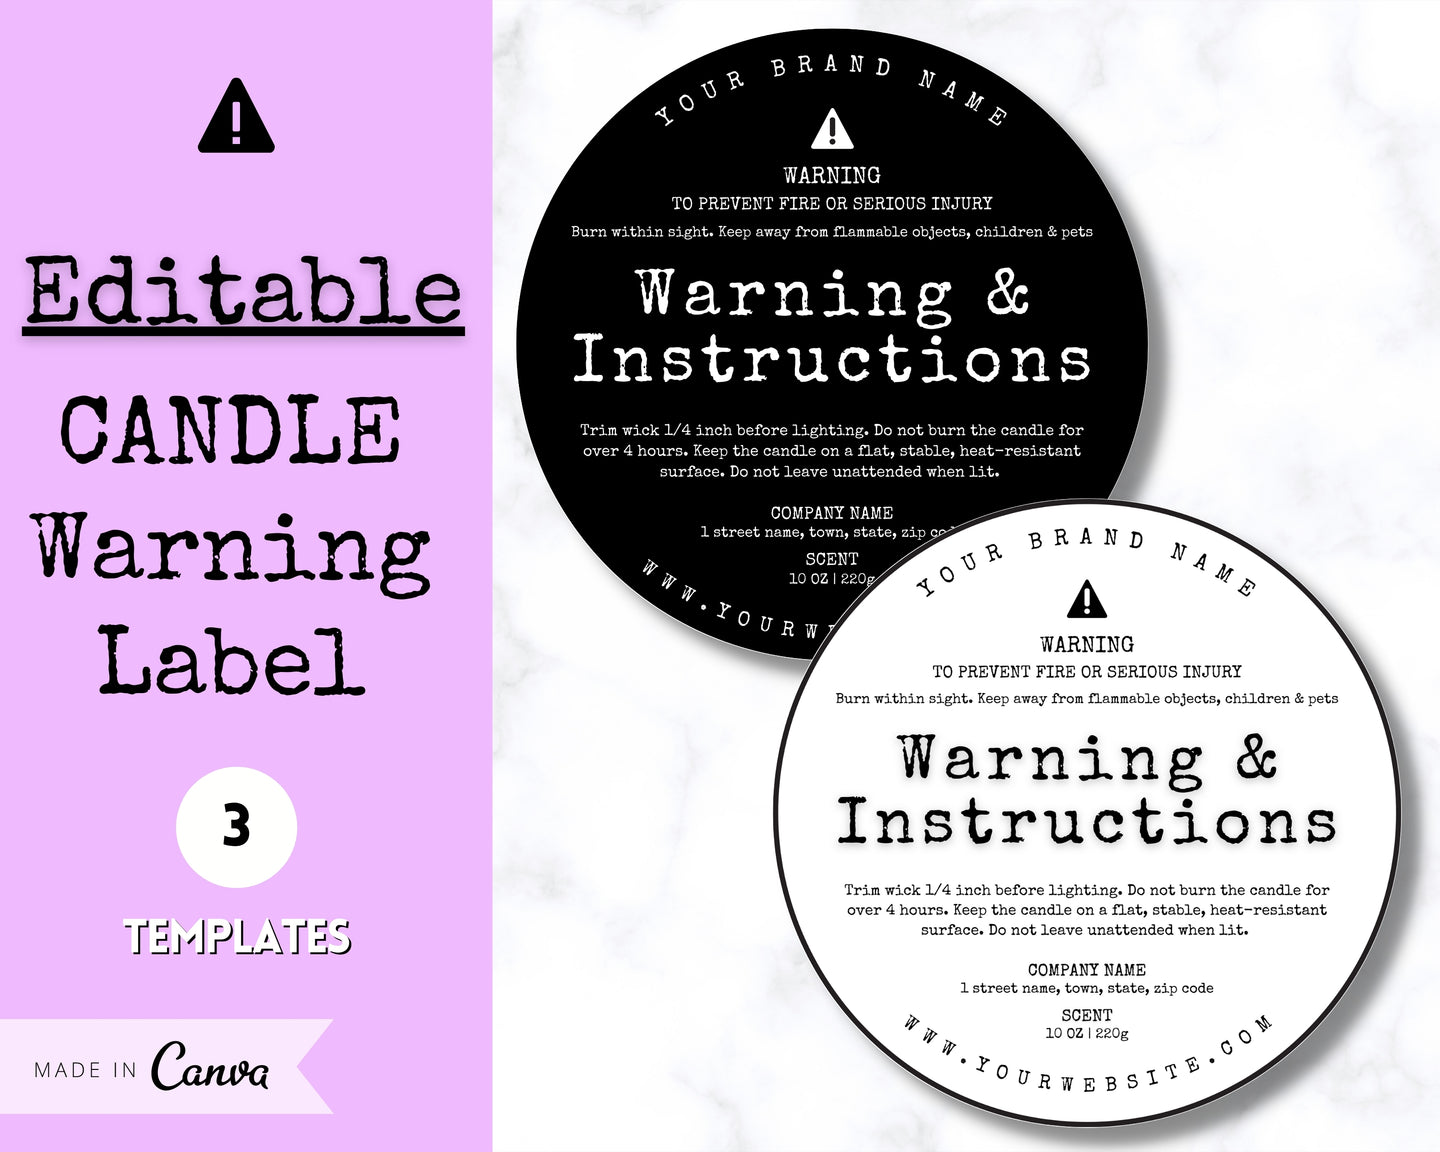 EDITABLE Candle Warning Label Template | Candle Care & Fire Safety Instructions, Round Packaging Label Care Card, Candle Maker Seller | Type